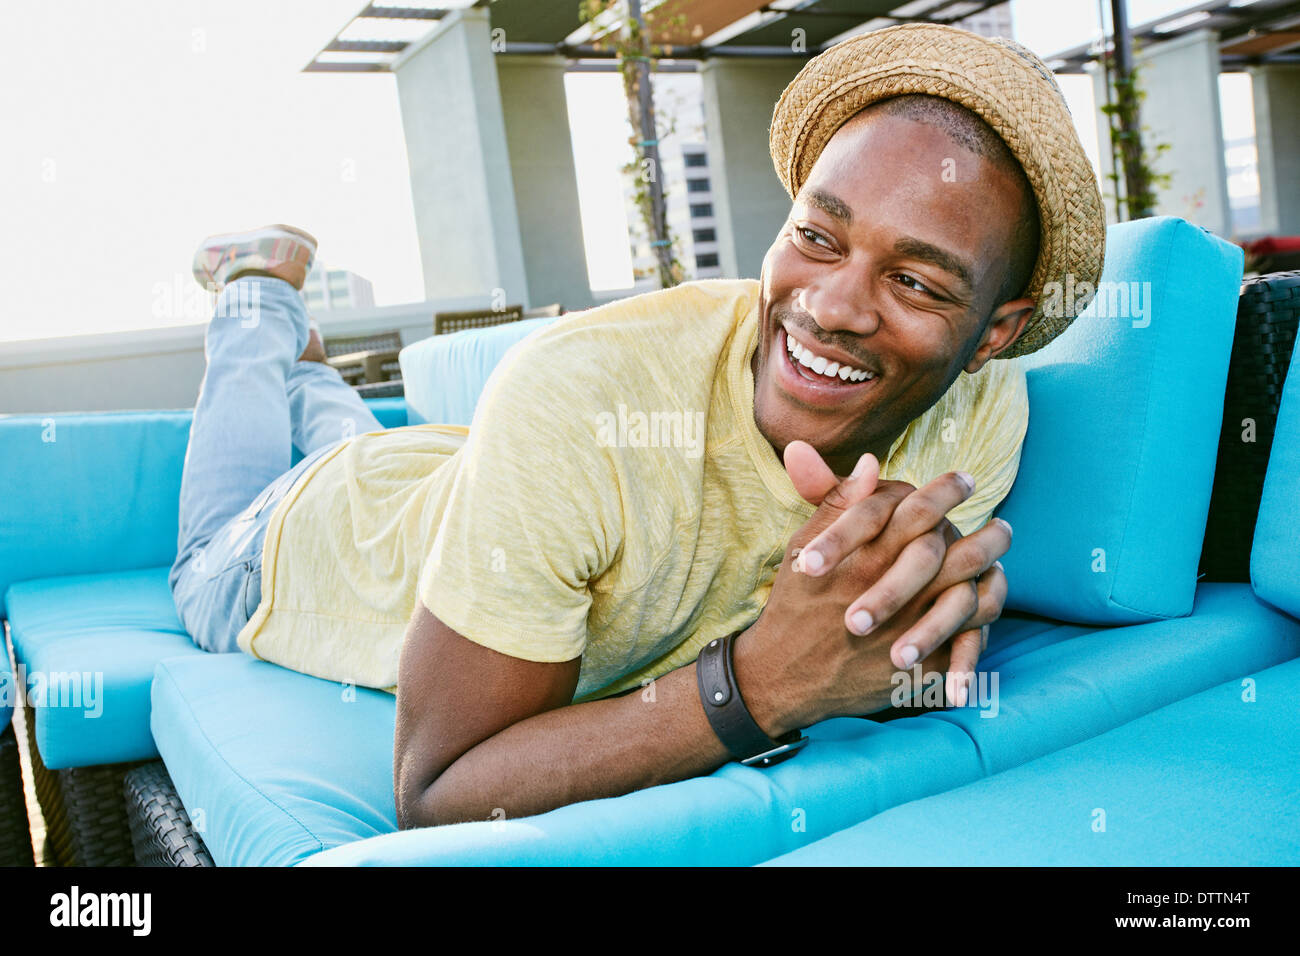 Black man relaxing on sofa on urban rooftop Stock Photo